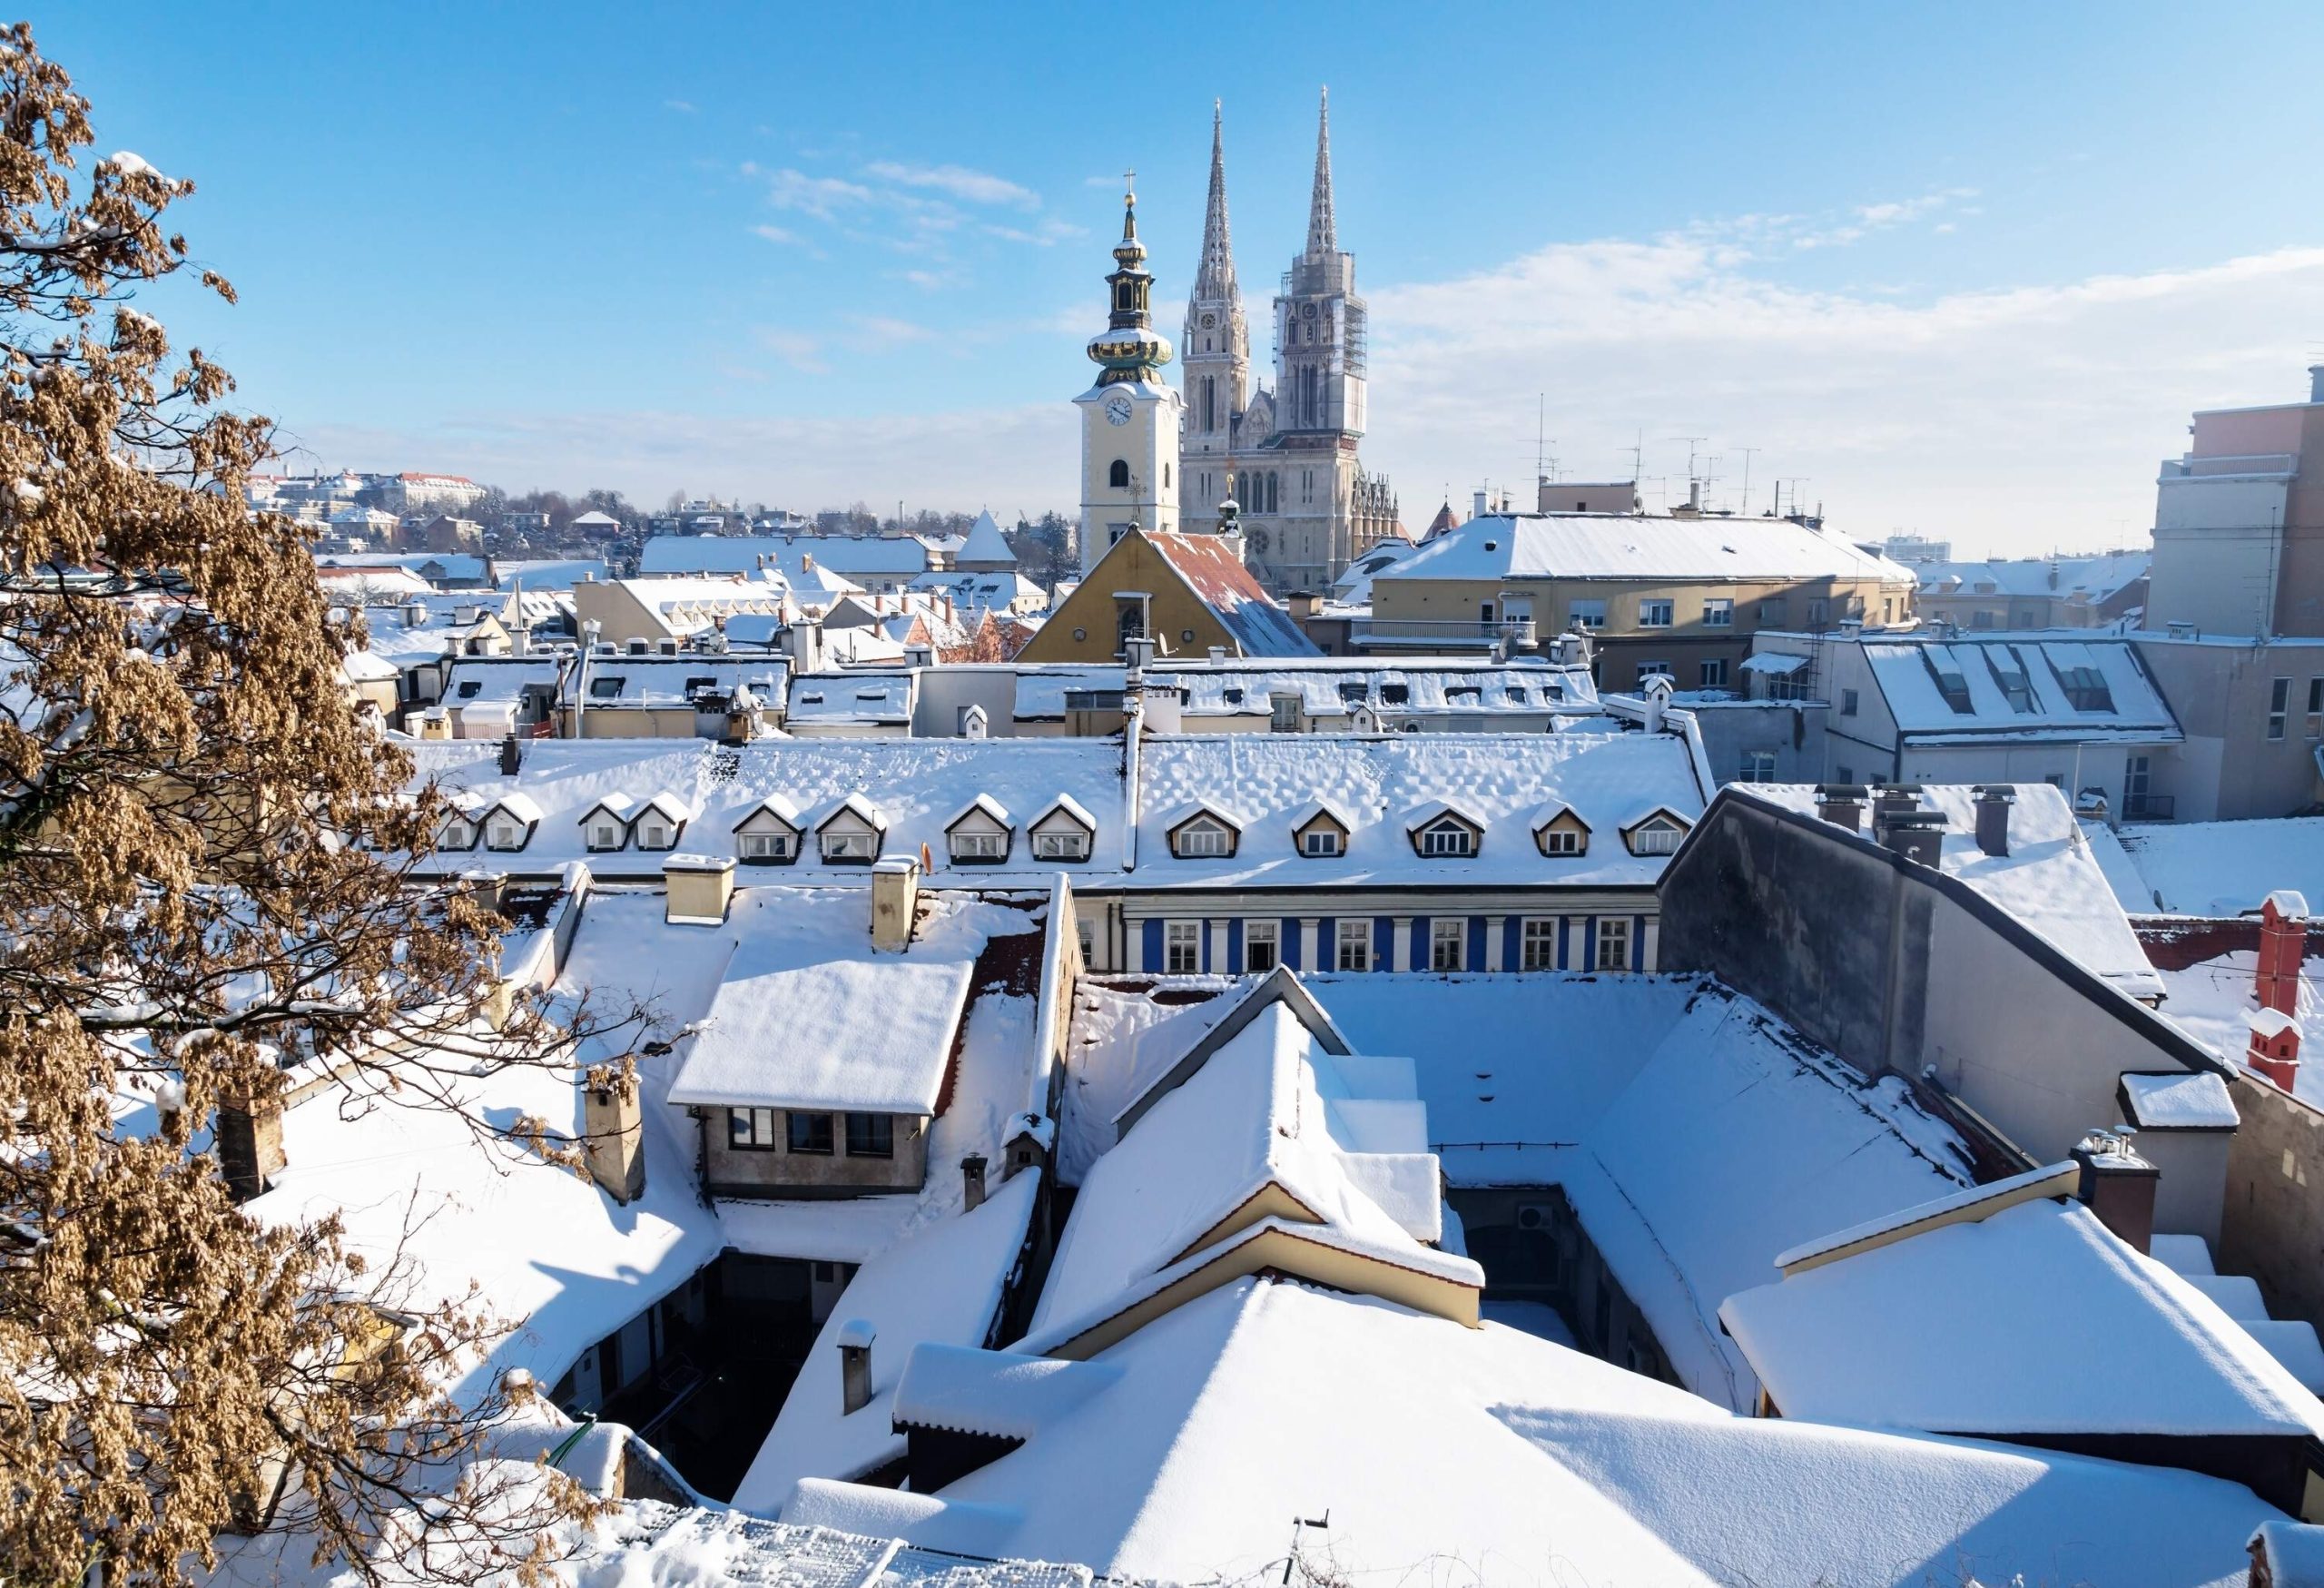 Stunning cityscape, with towers and church steeples peeking out from behind snow-covered buildings.